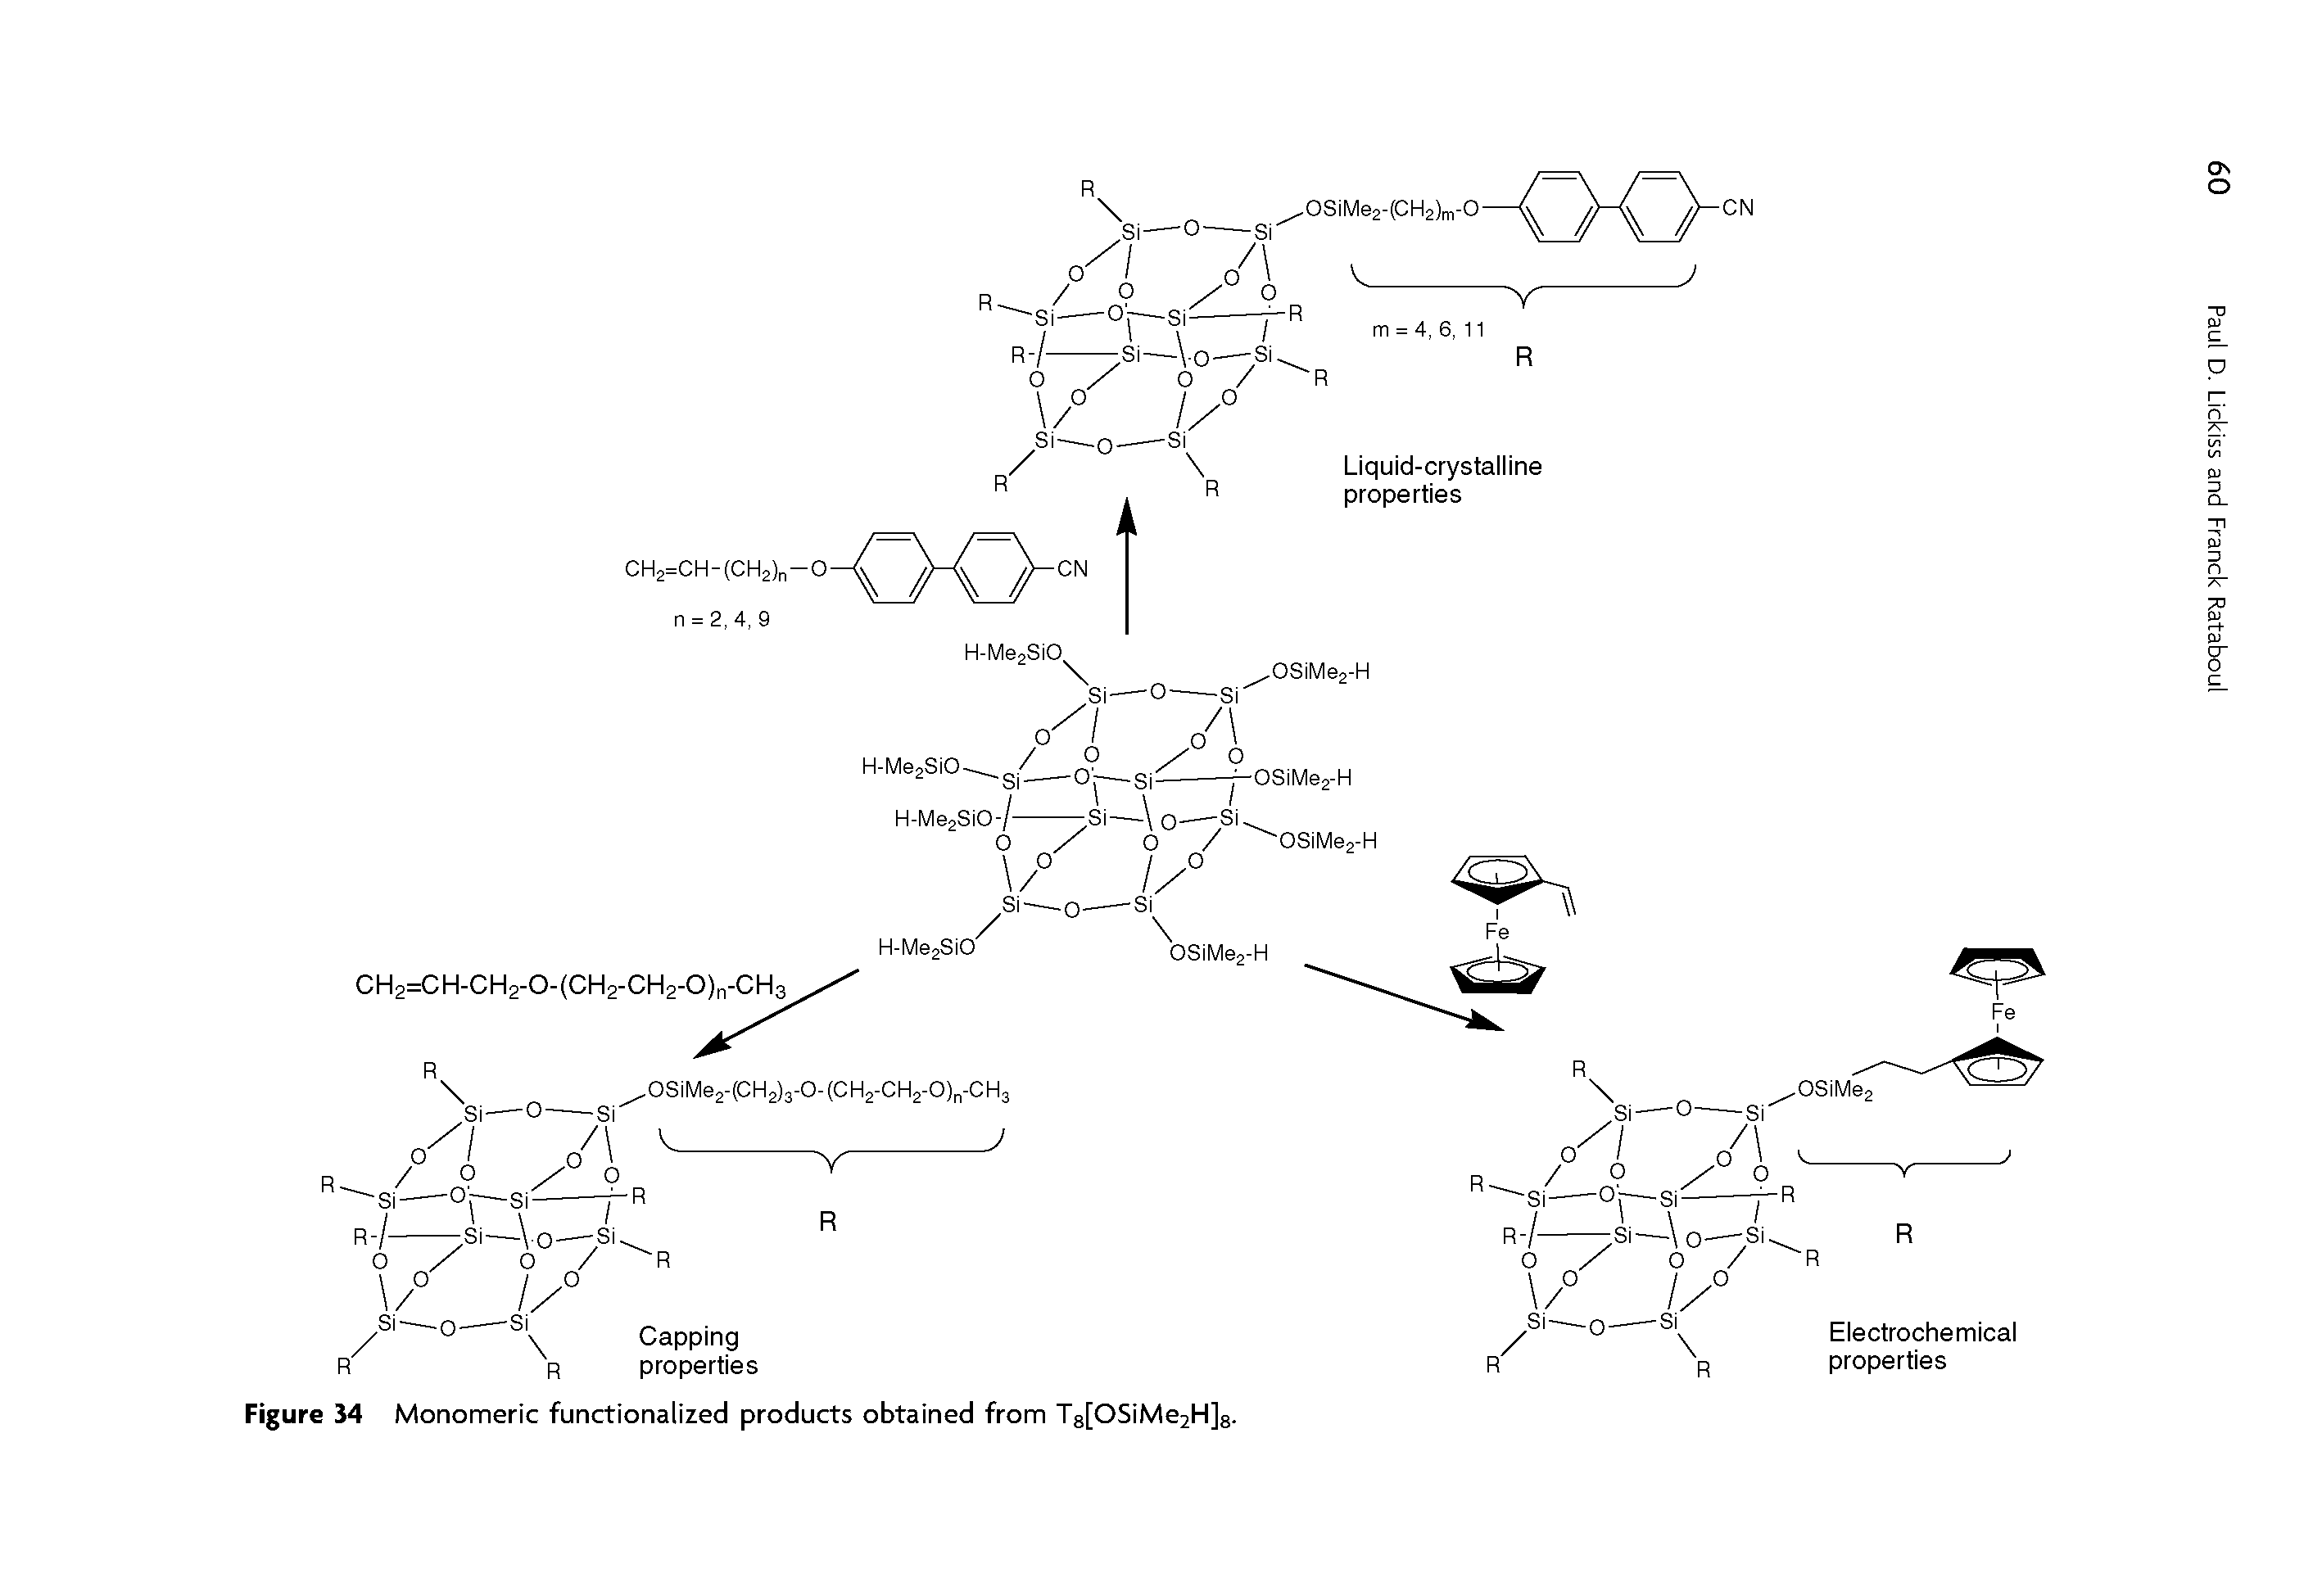 Figure 34 Monomeric functionalized products obtained from T8[OSiMe2H]s.